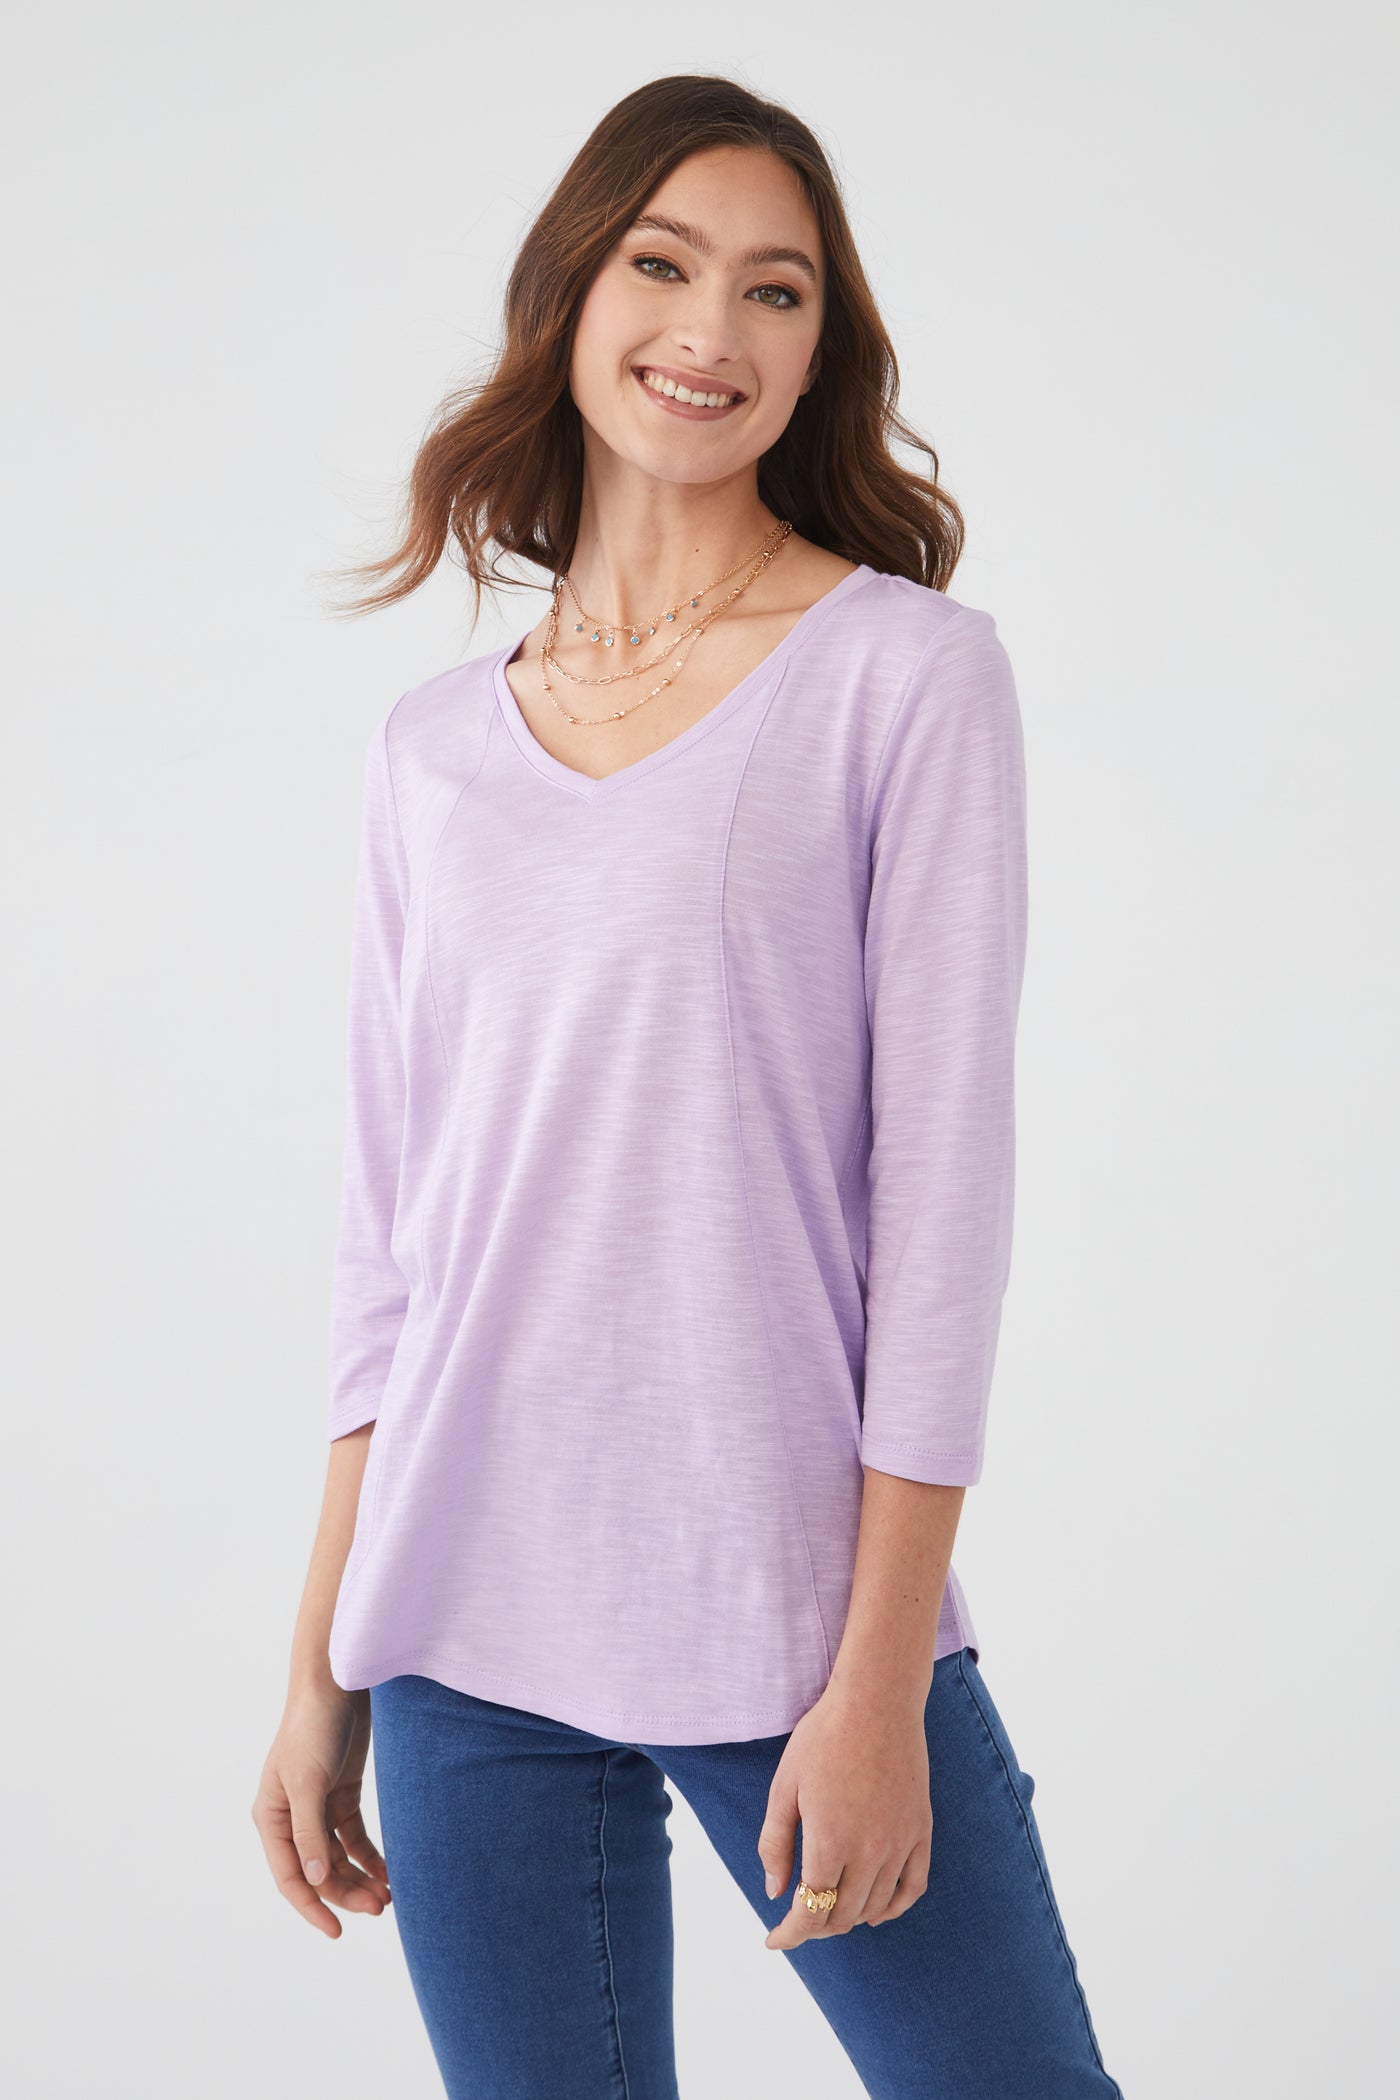 French Dressing Jeans V-Neck Top in Solid Slub Jersey 